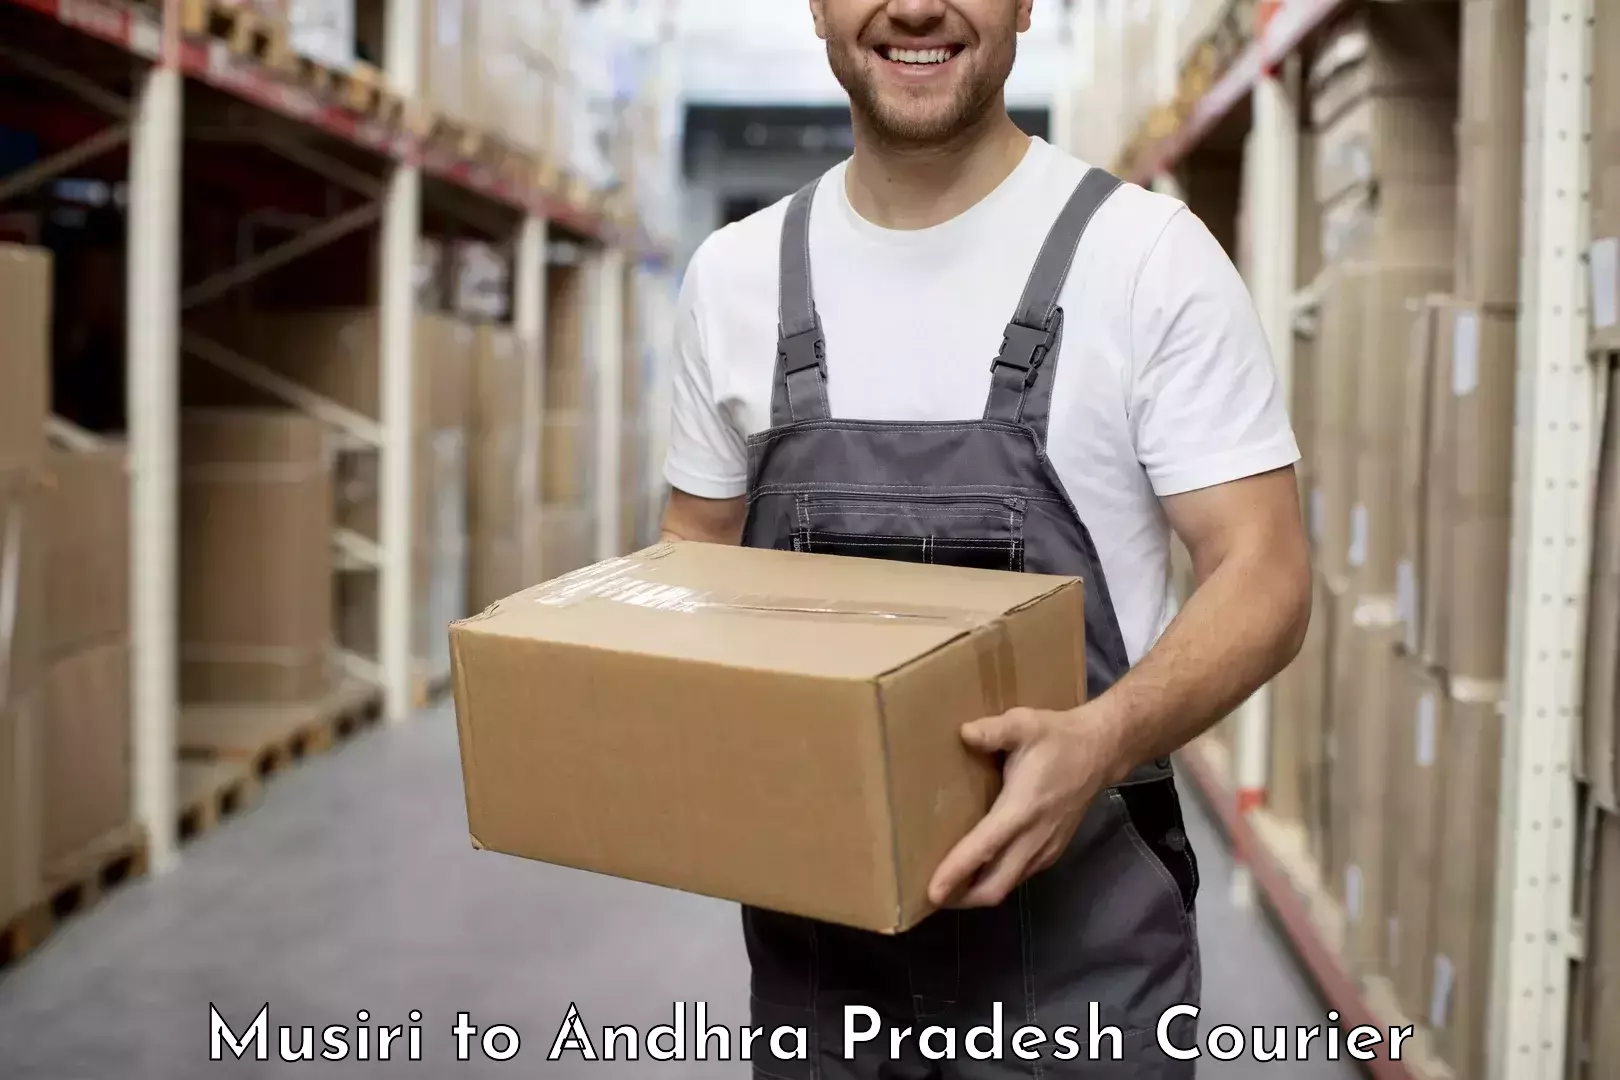 On-time delivery services Musiri to Tirupati